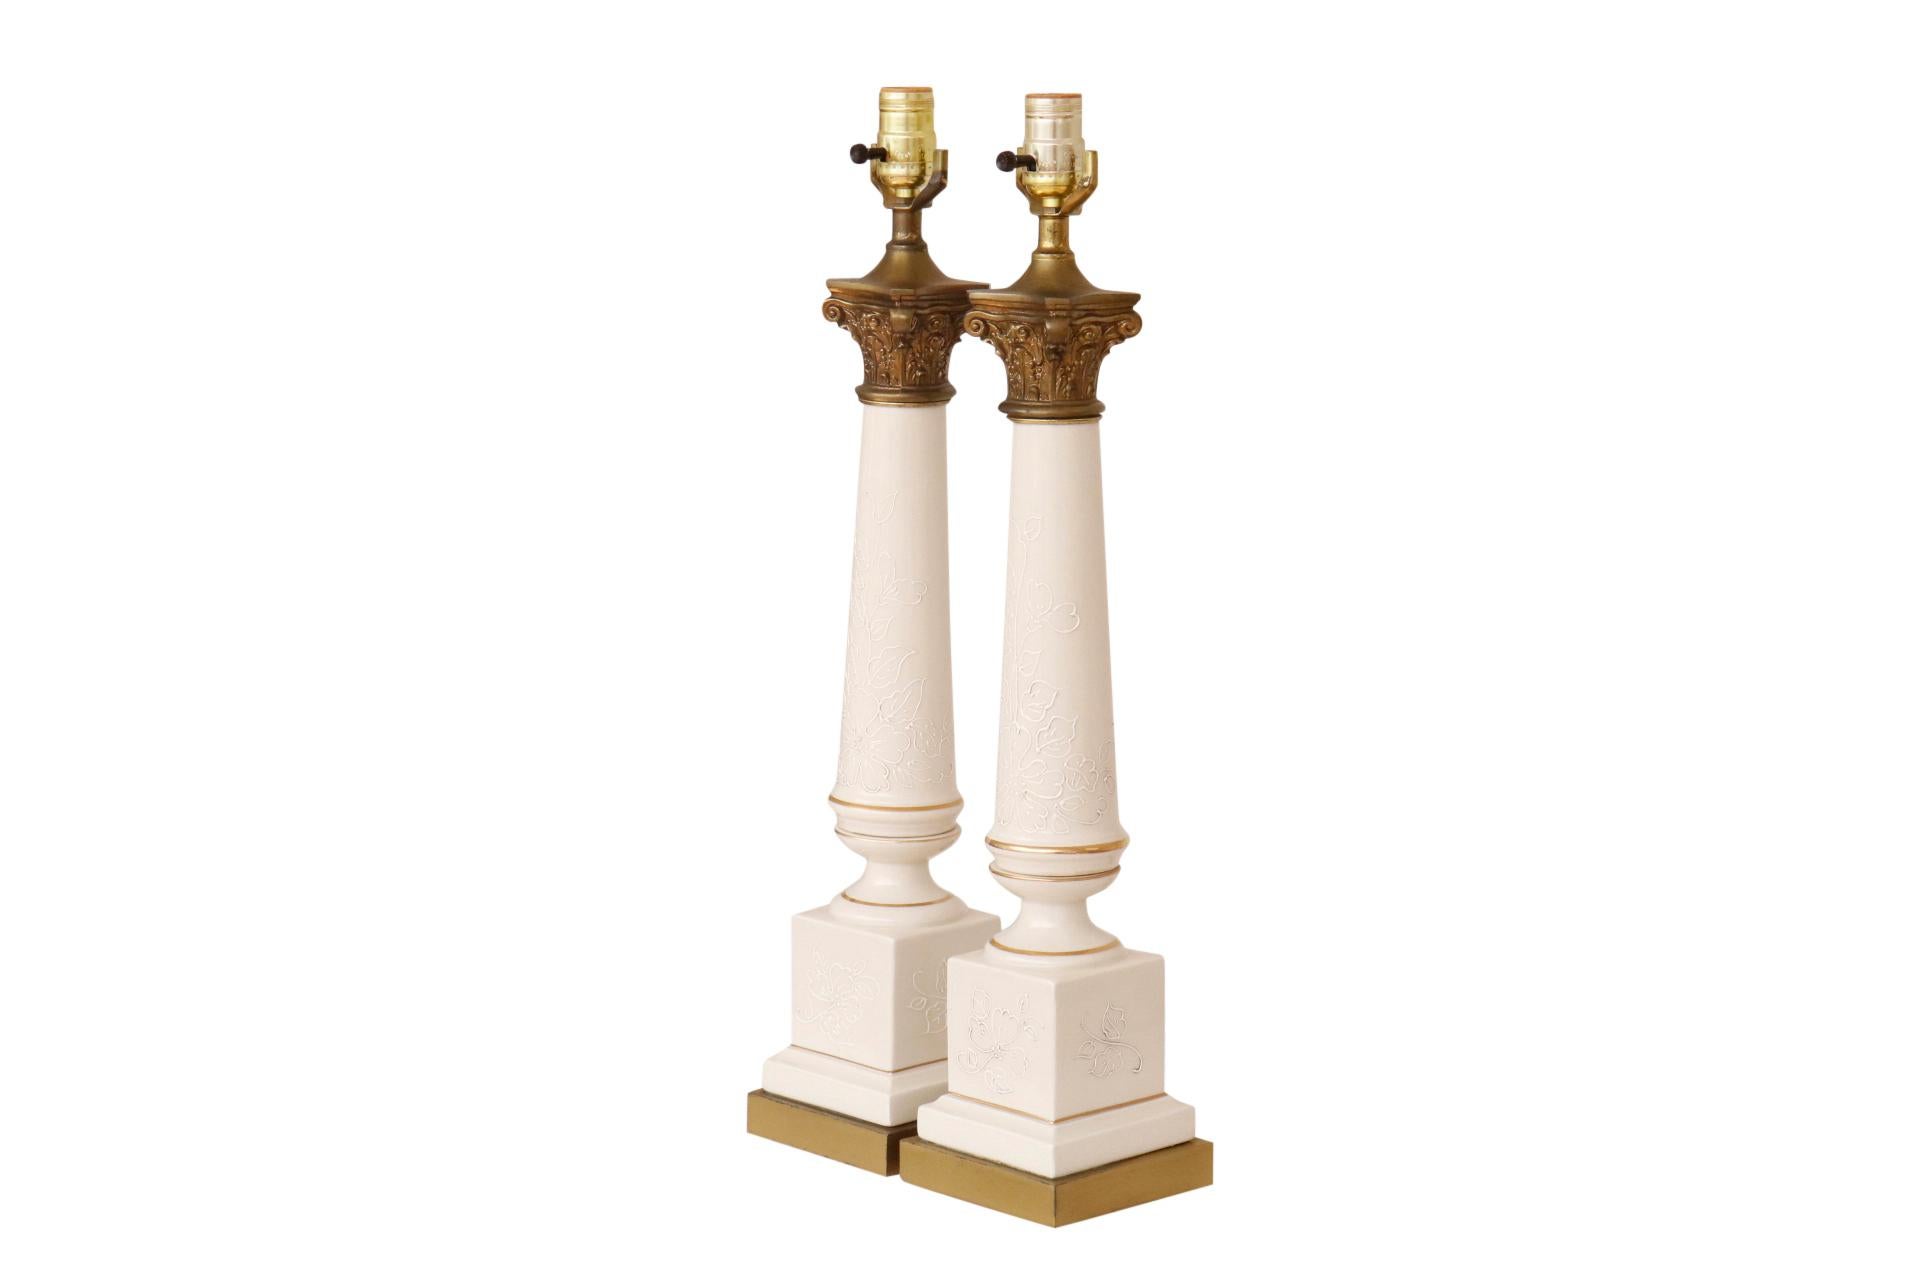 A pair of French Empire style ceramic table lamps by Tyndale. Sleek baluster shaped columns are topped with brass capitals cast with scrolled acanthus leaves. Columns are decorated with a floral motif, mirrored on the block bases. Trimmed with gilt